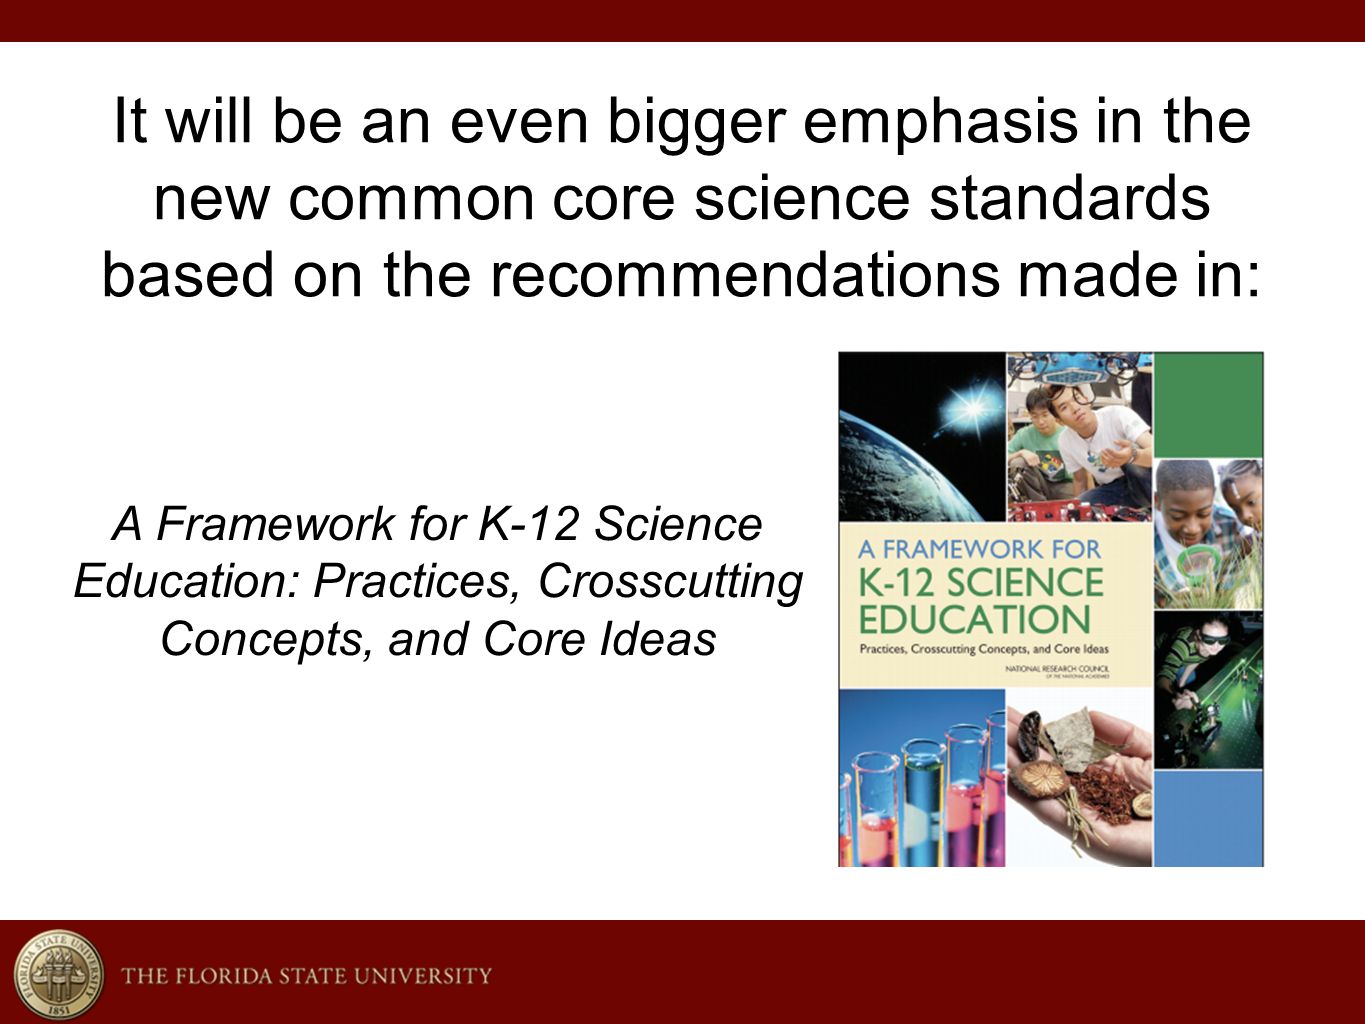 It will be an even bigger emphasis in the new common core science standards based on the recommendations made in: A Framework for K-12 Science Education: Practices, Crosscutting Concepts, and Core Ideas